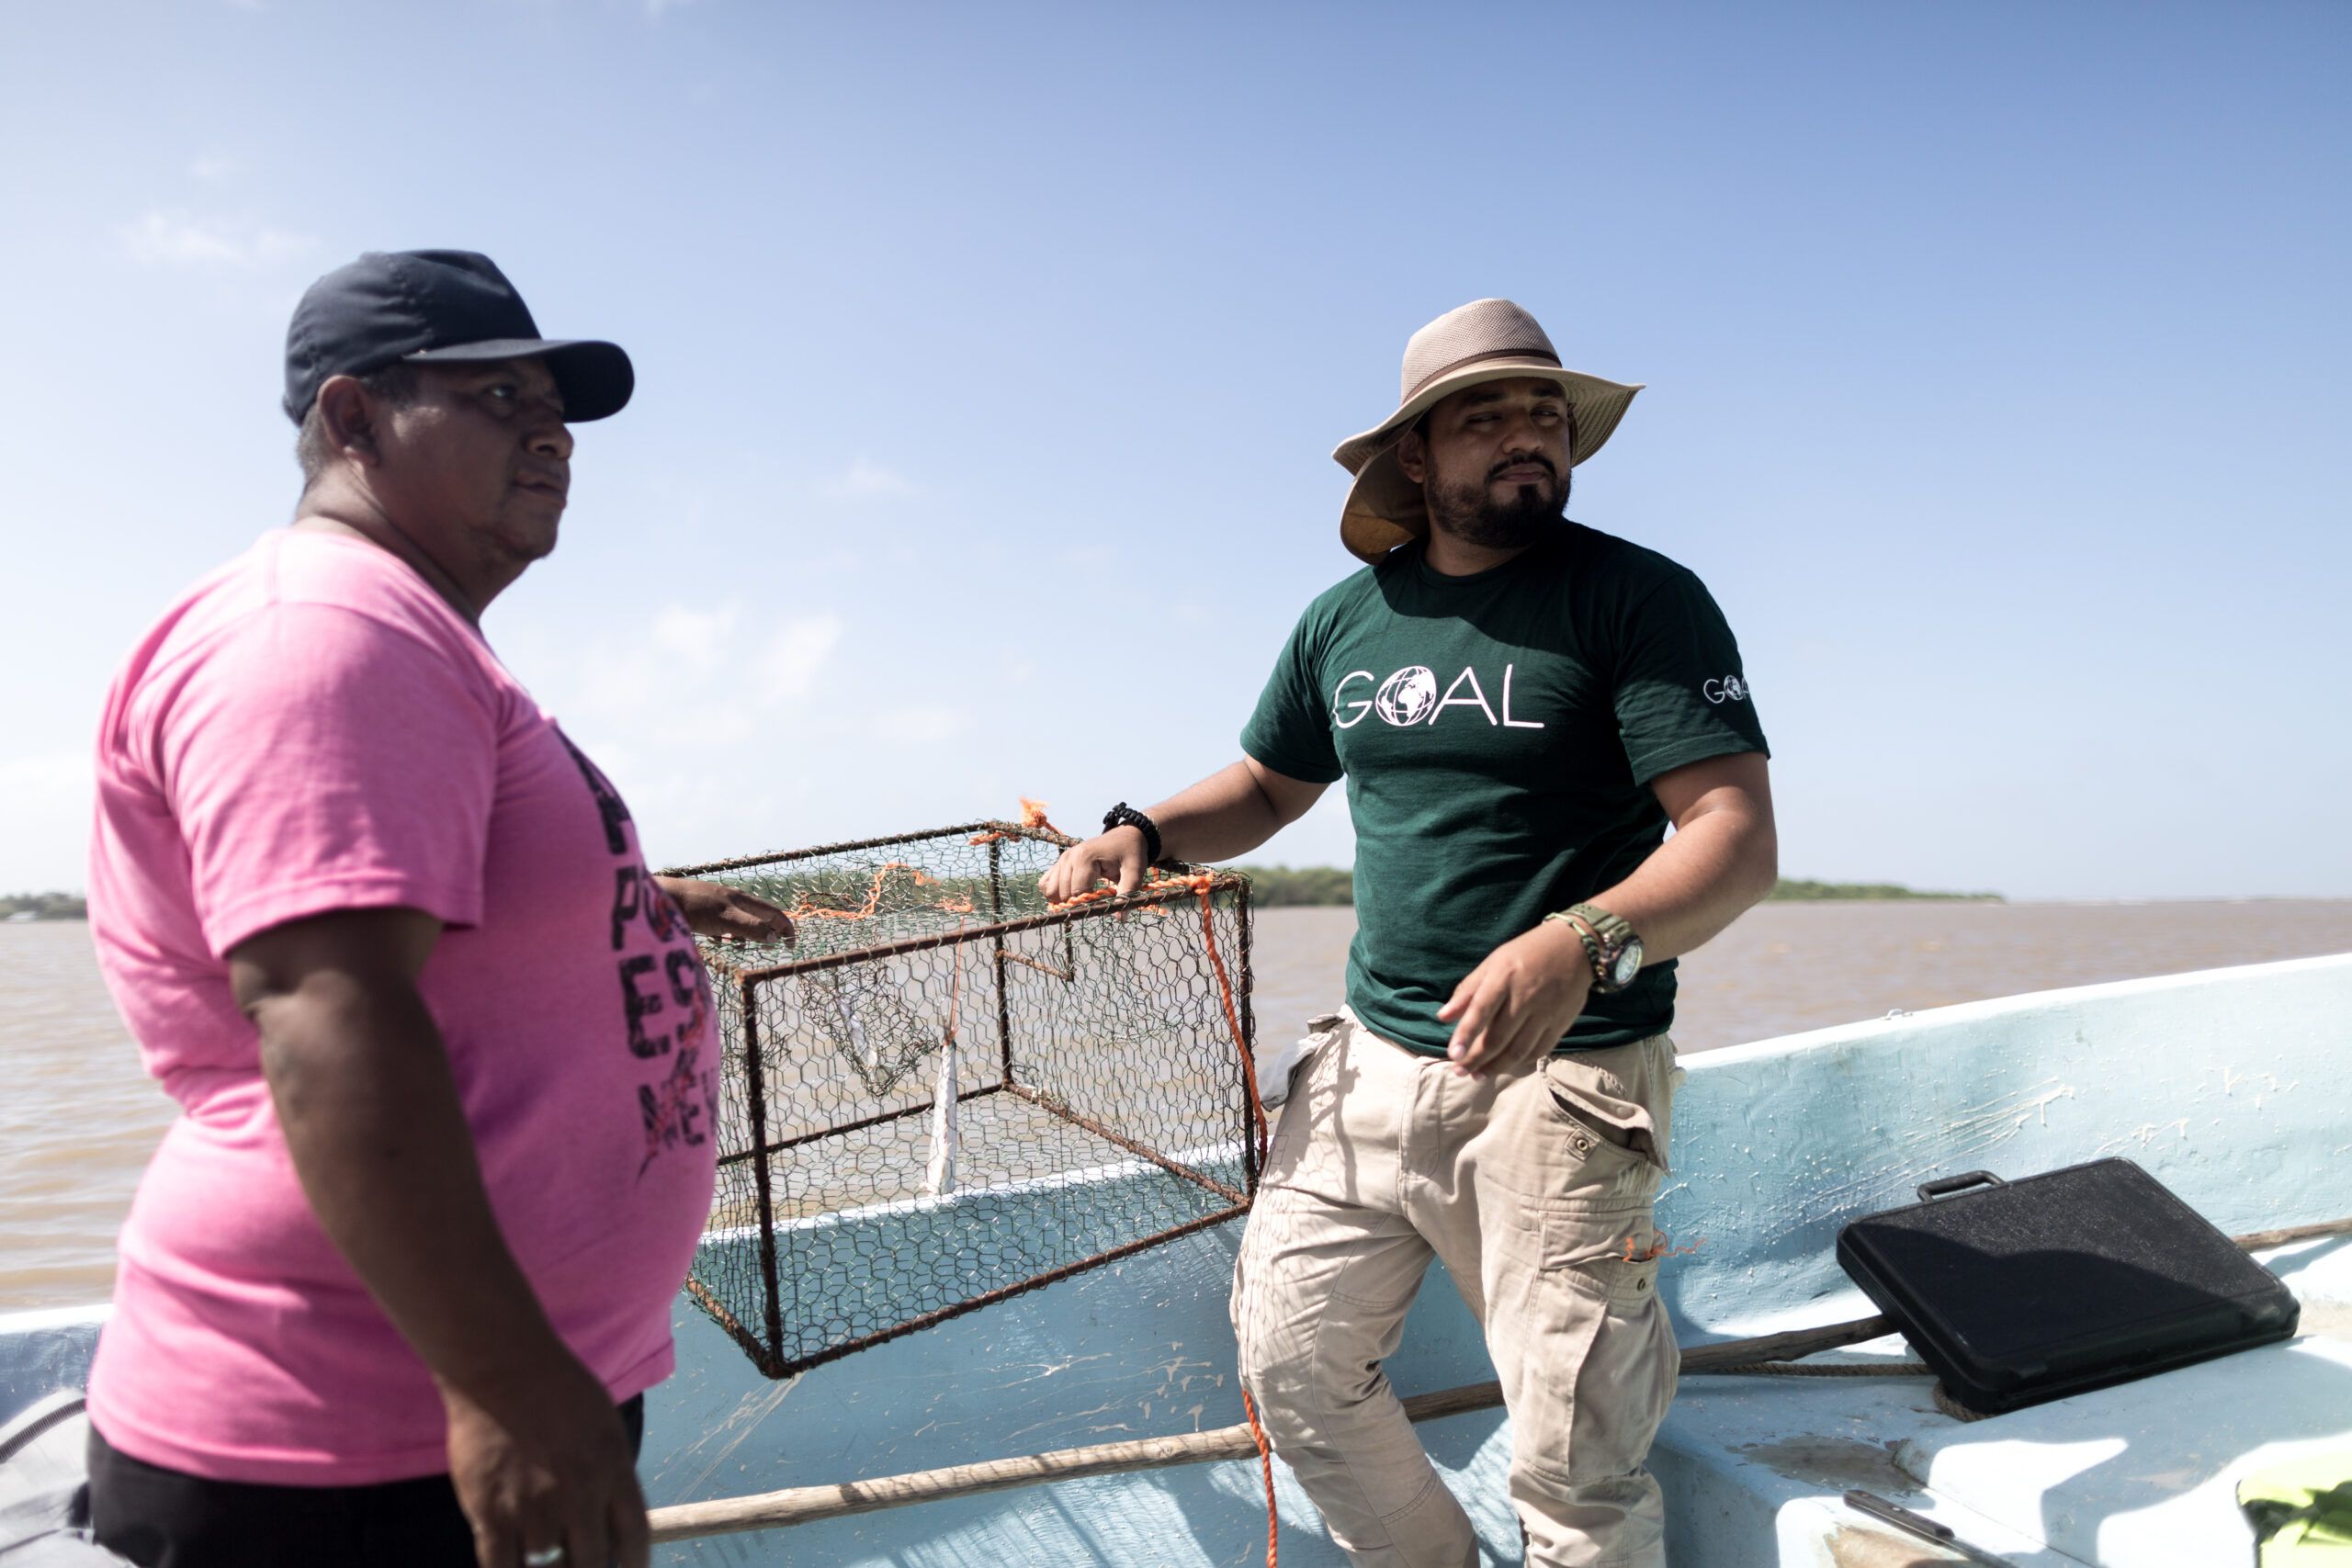 Progressing GOAL's Blue Economy goals by working with local fishers in Honduras under the MiPesca Program.